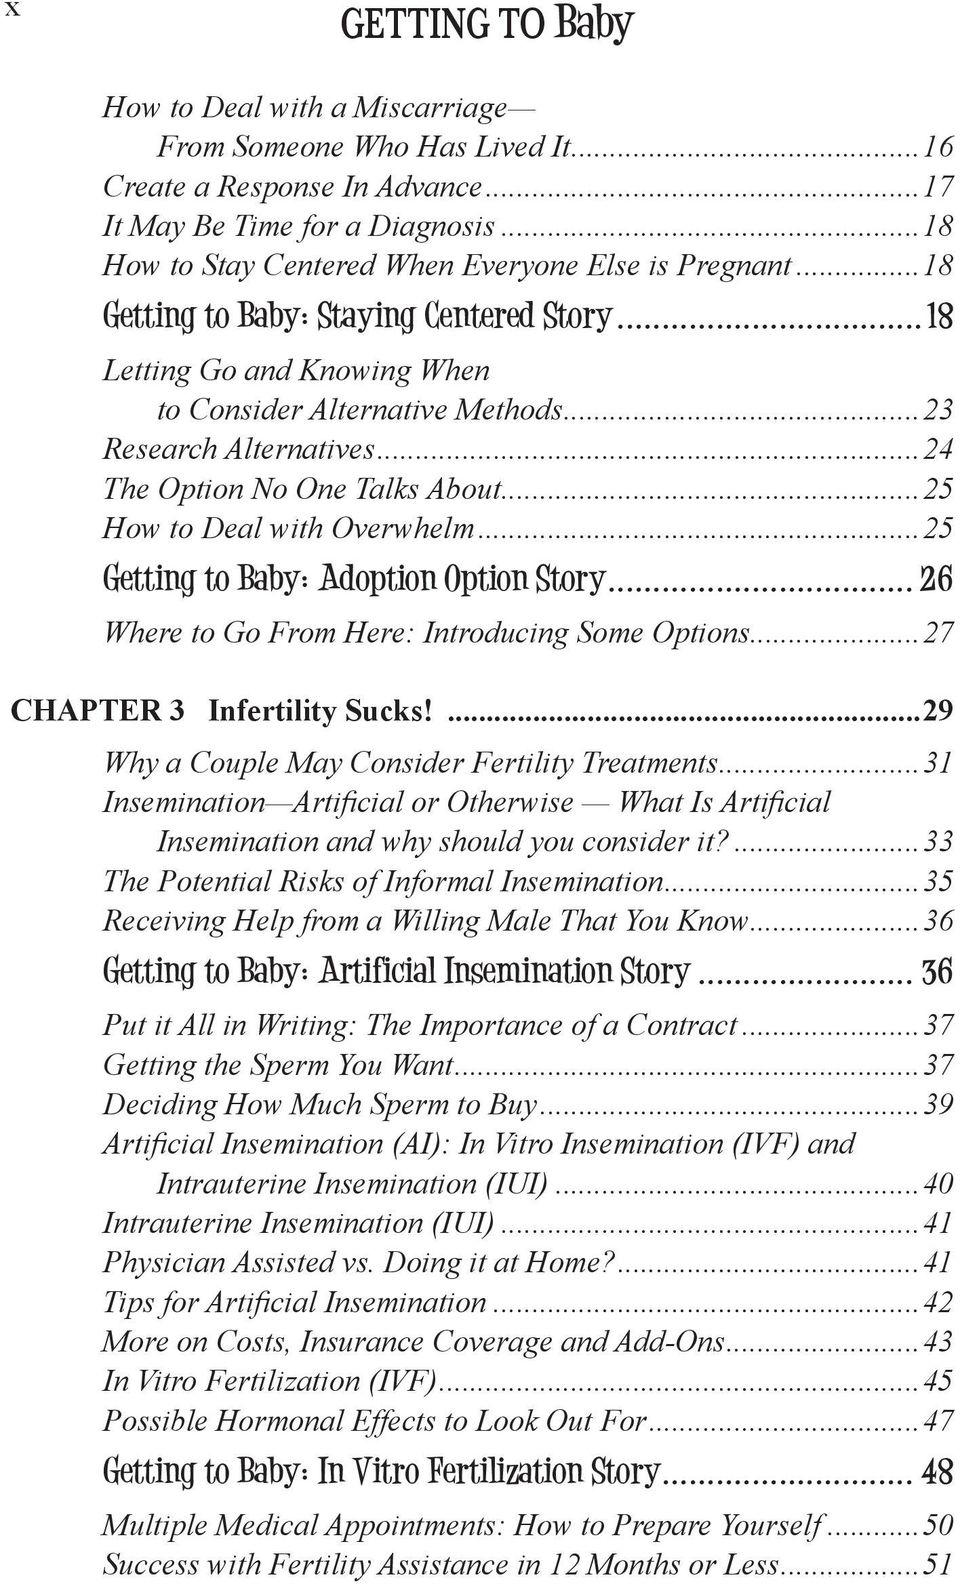 ..27 CHAPTER 3 Infertility Sucks!...29 Why a Couple May Consider Fertility Treatments...31...33 The Potential Risks of Informal Insemination...35...36 Getting to Baby: Artificial Insemination Story.